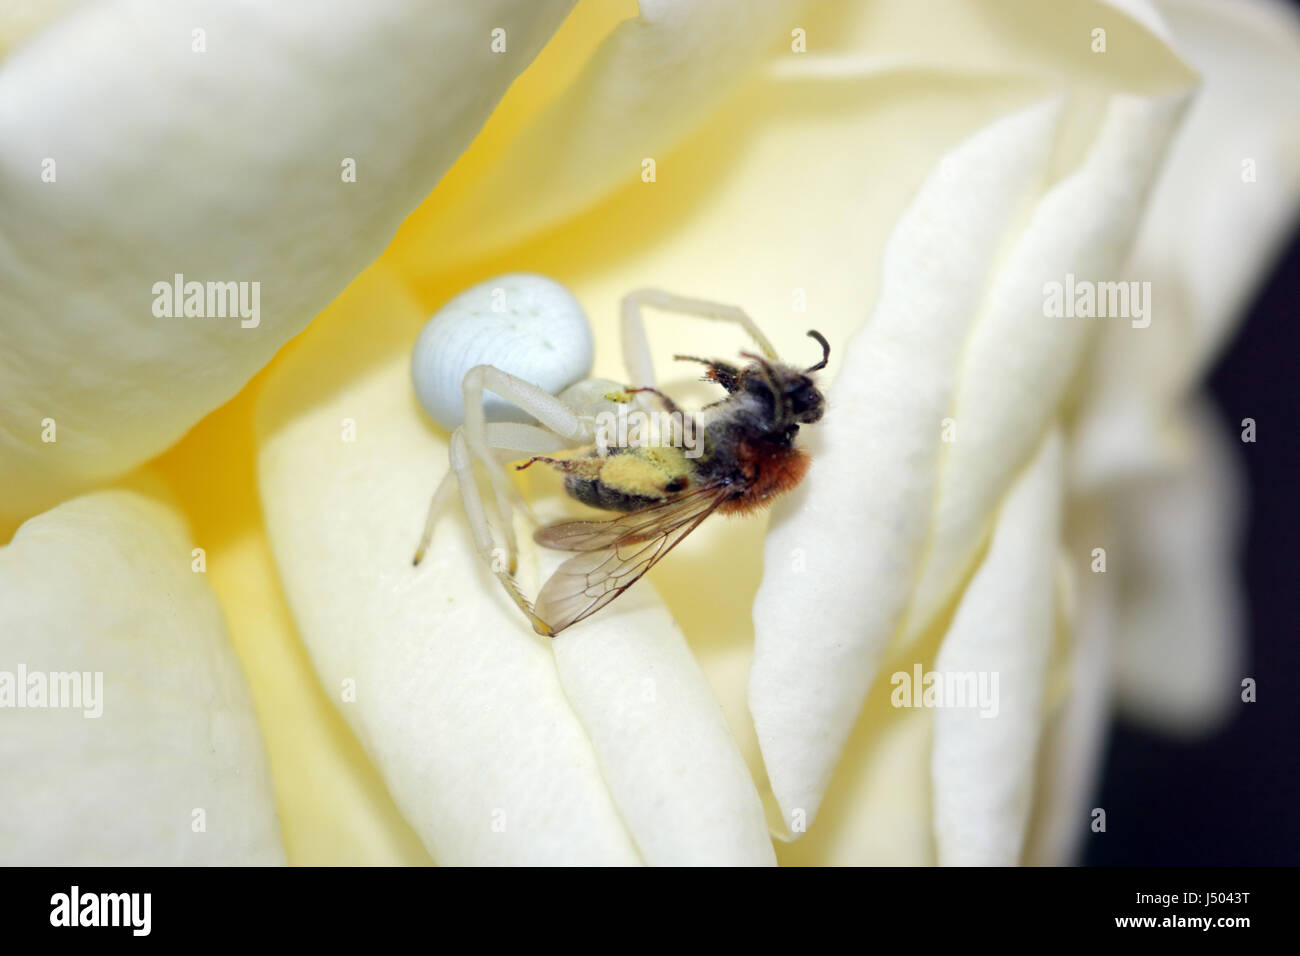 Epsom, Surrey, UK. 14th May 2017. A white crab spider has caught and killed a honey bee on a garden rose in Epsom Surrey. Credit: Julia Gavin UK/Alamy Live News Stock Photo